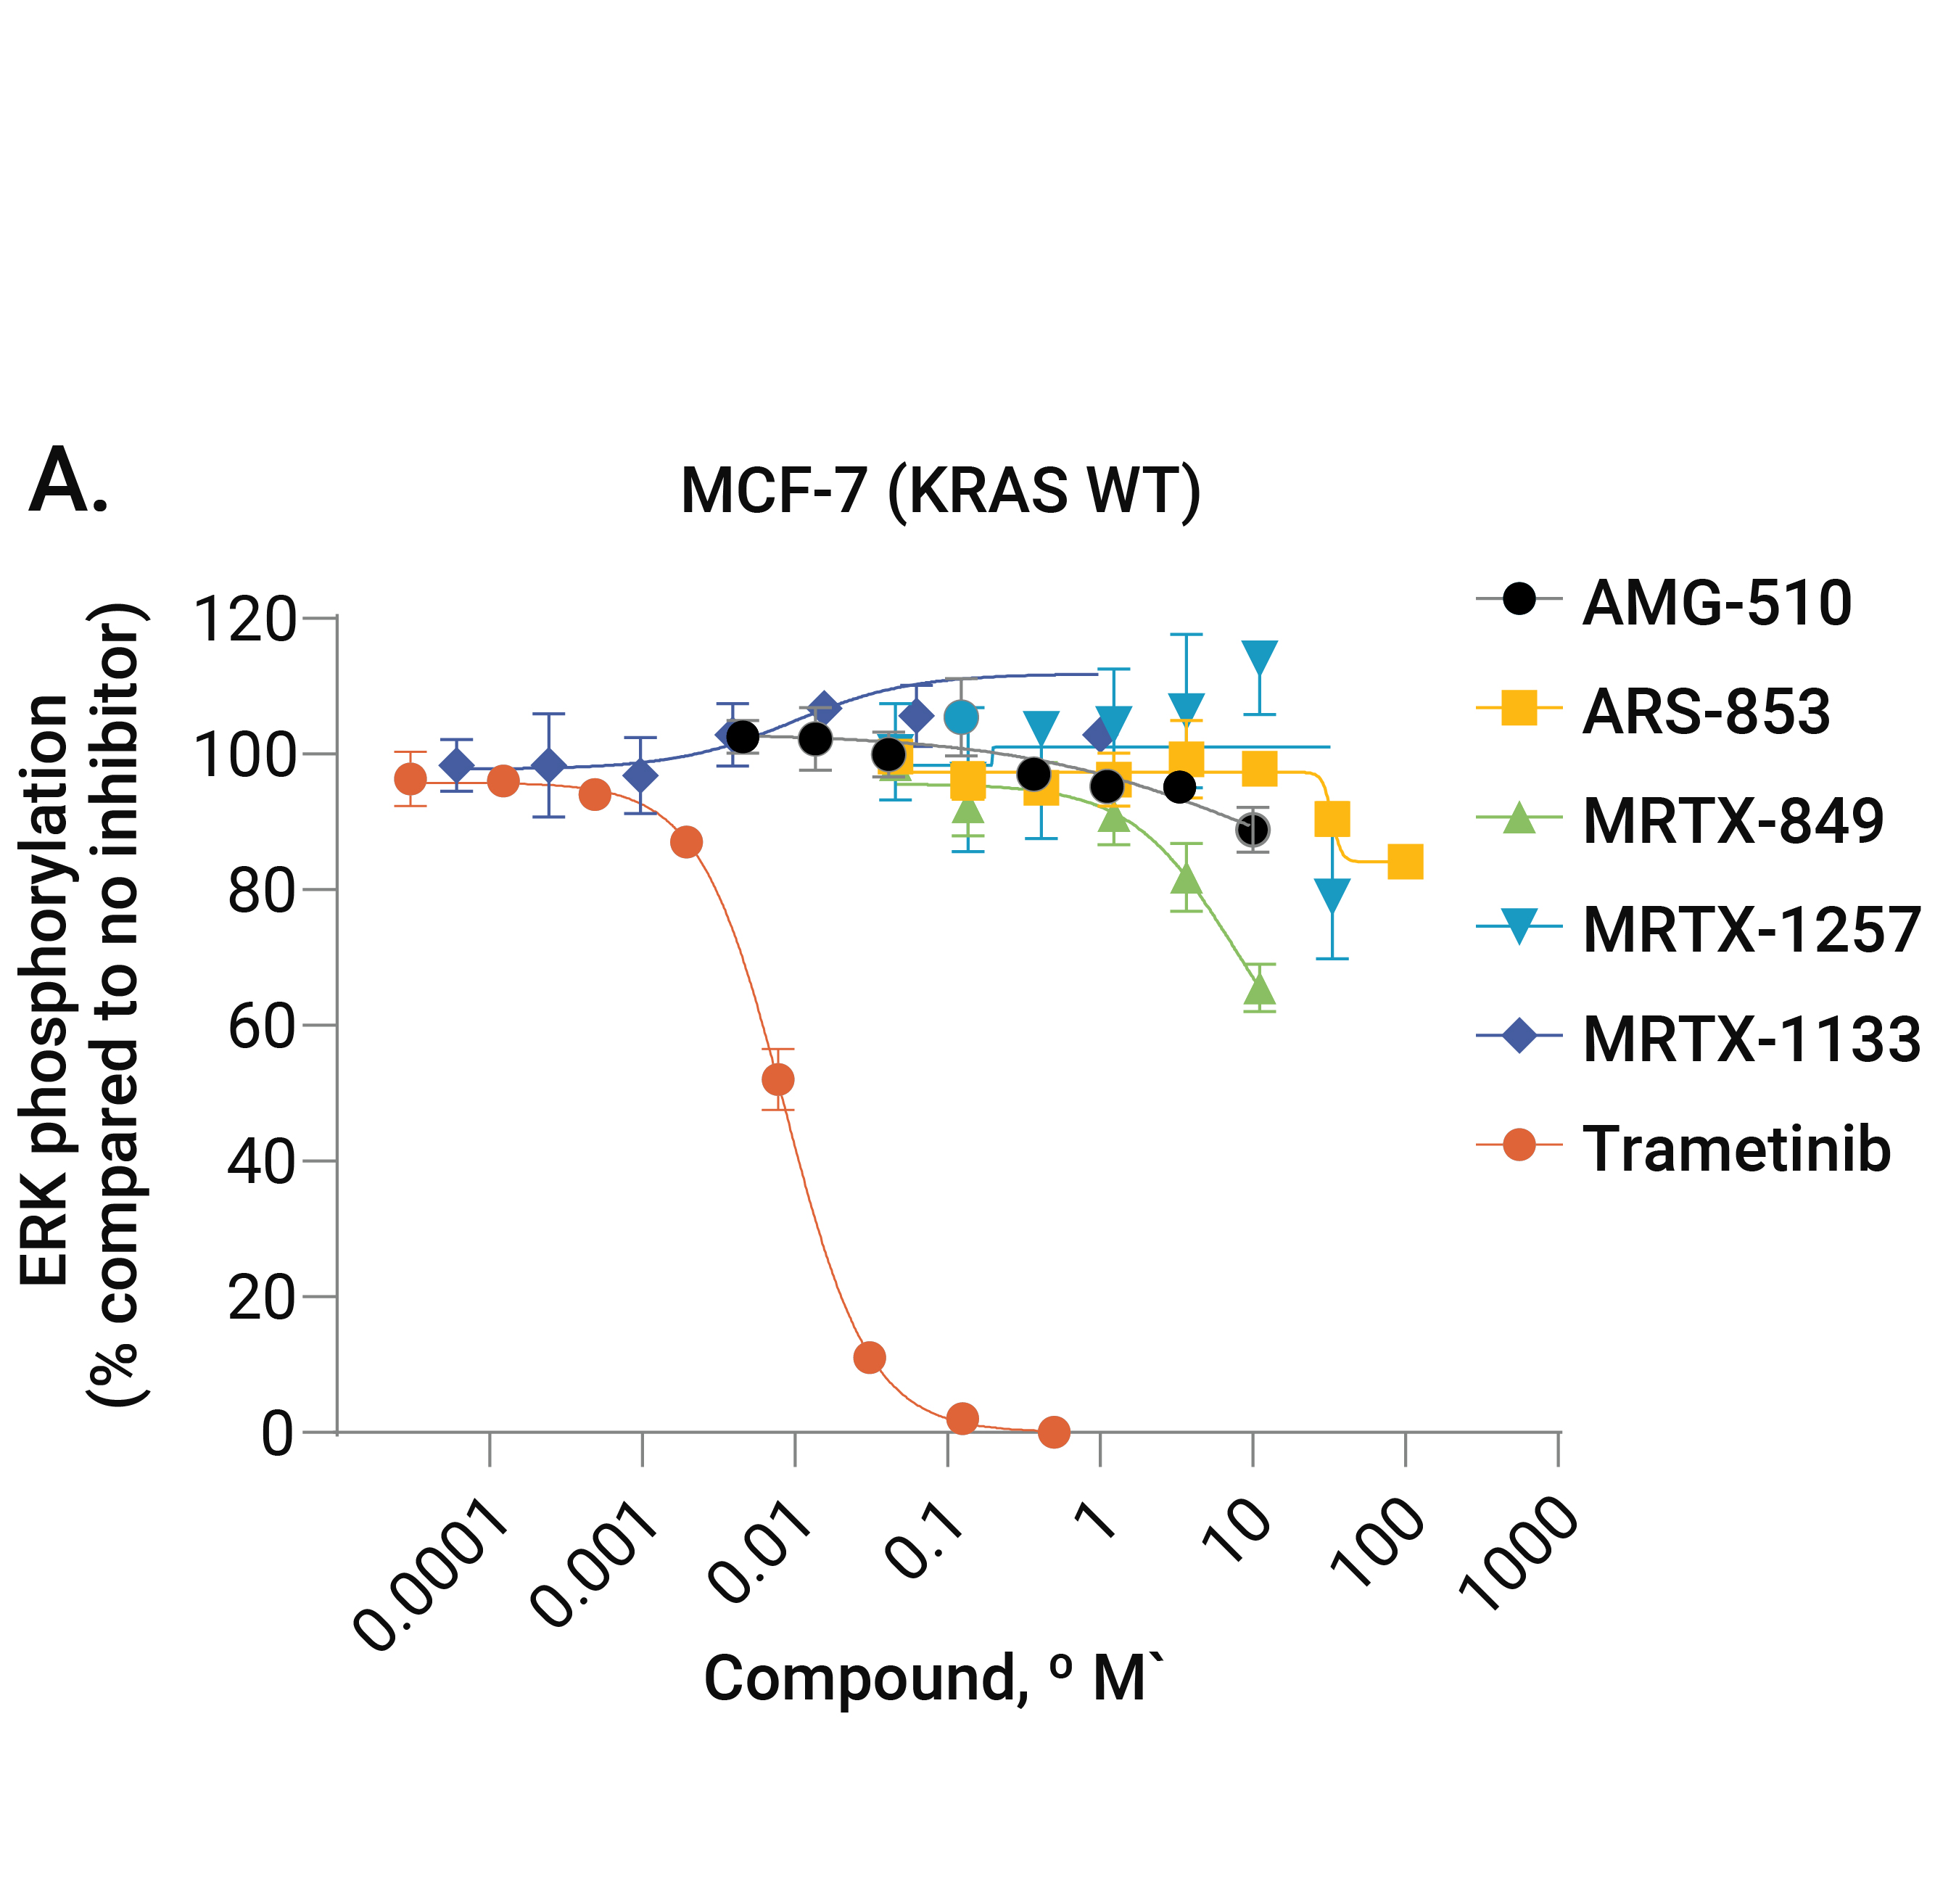 18337ma-01-01-Graph showing now pERK expression inhibition in MCF-7 (KRAS wild type) cells following treatment with KRAS inhibitors.